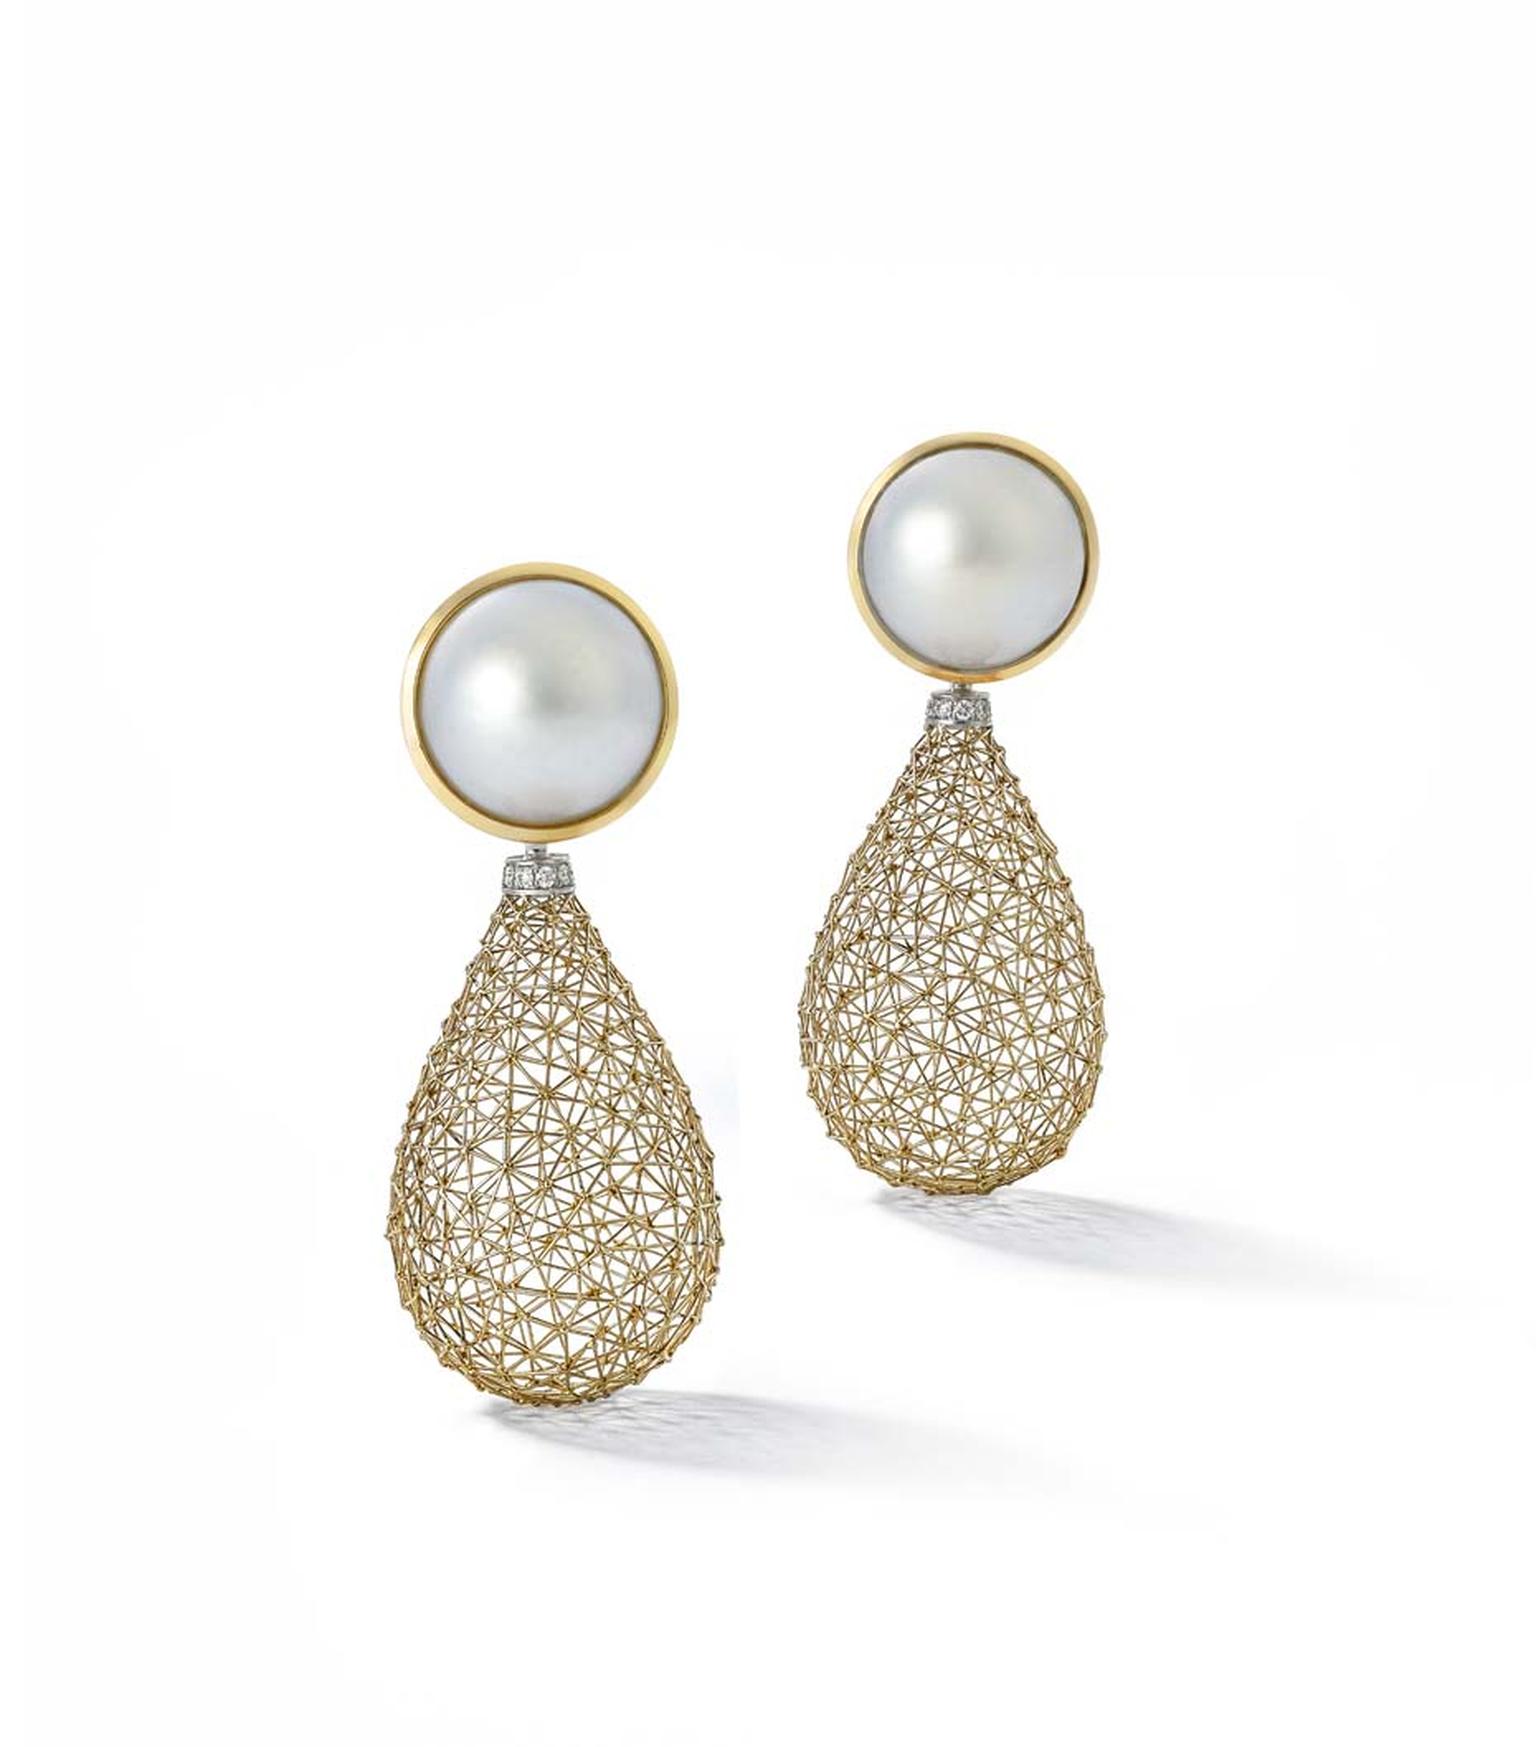 Tom Rucker Geosphere Gemini ear pendants featuring white gold drops with a lattice work design and diamond-set cusps, suspended from a mabe pearl.